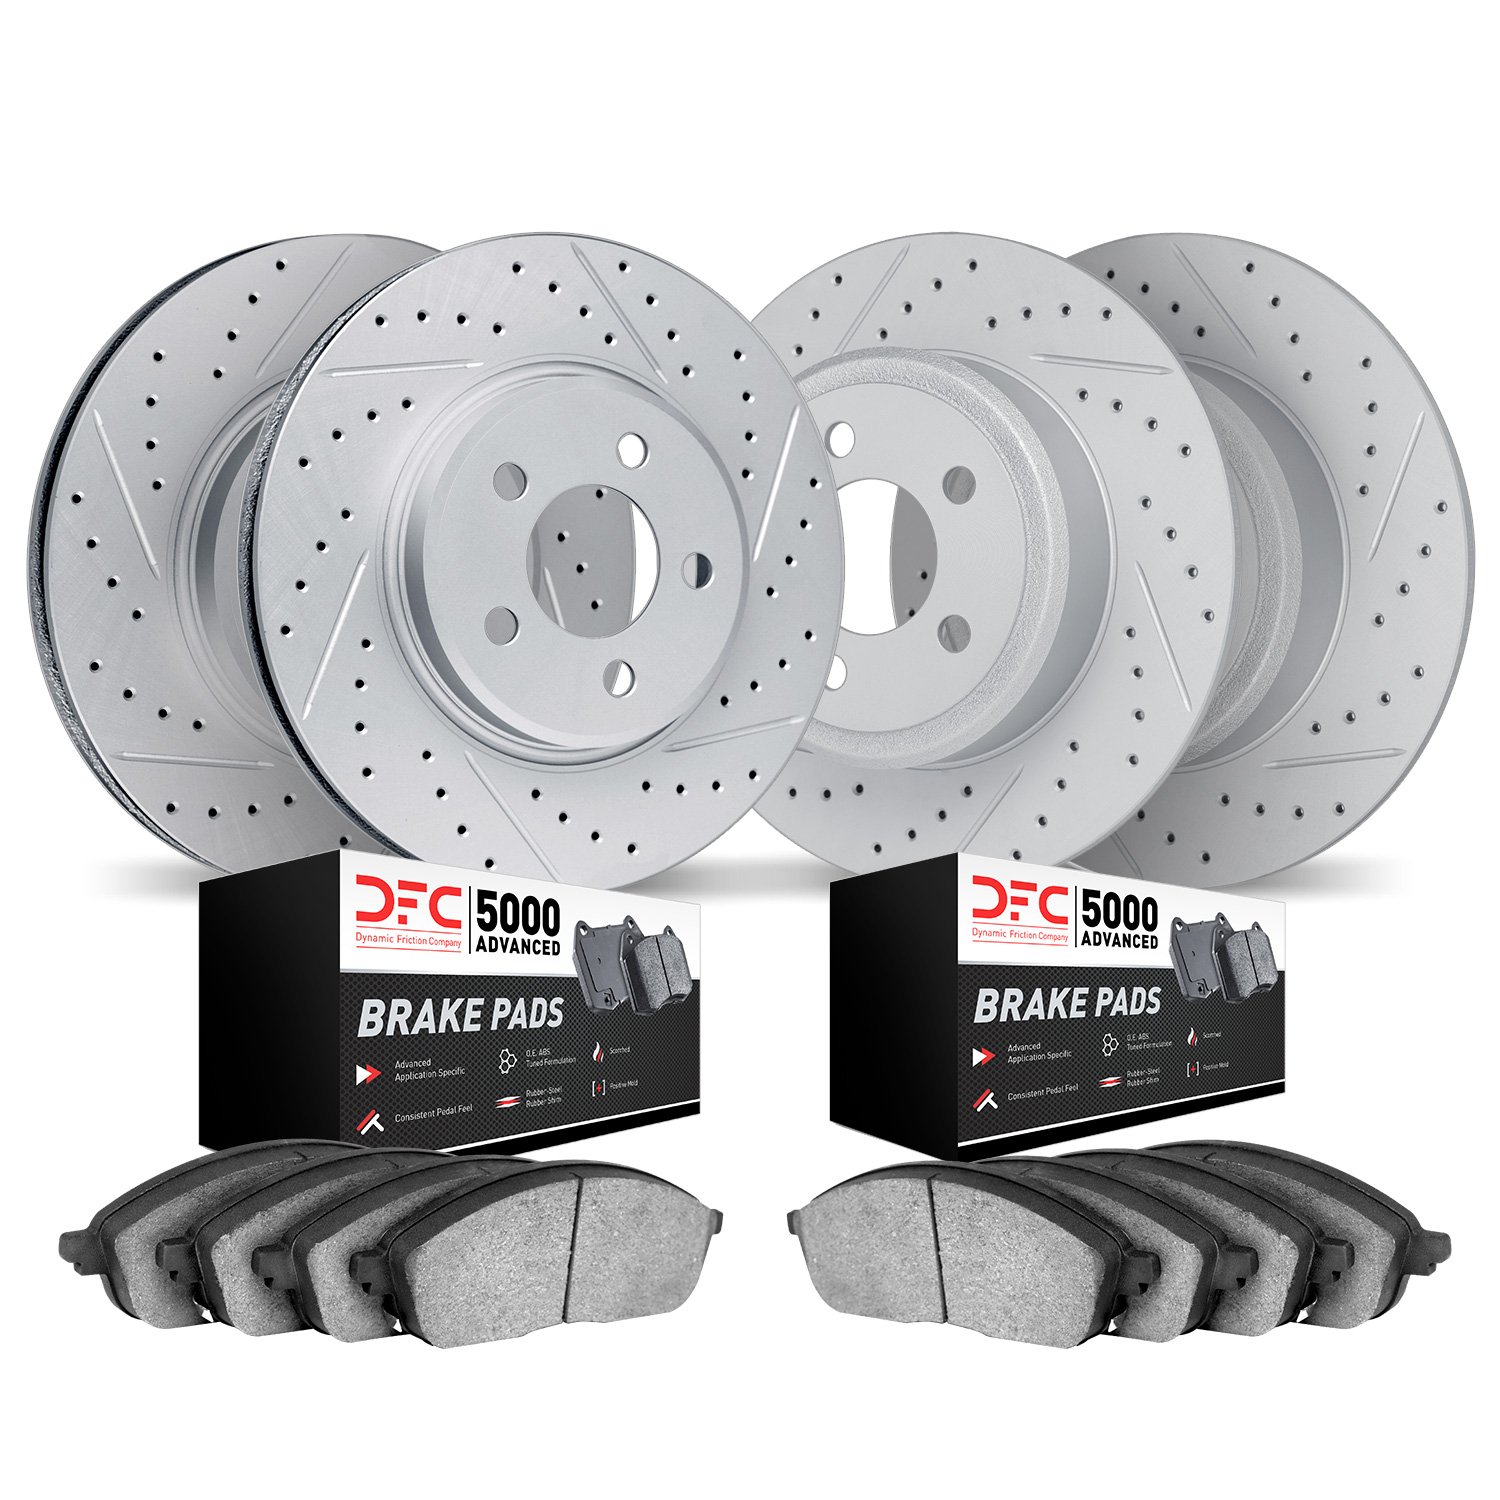 2504-58019 Geoperformance Drilled/Slotted Rotors w/5000 Advanced Brake Pads Kit, 2014-2016 Acura/Honda, Position: Front and Rear